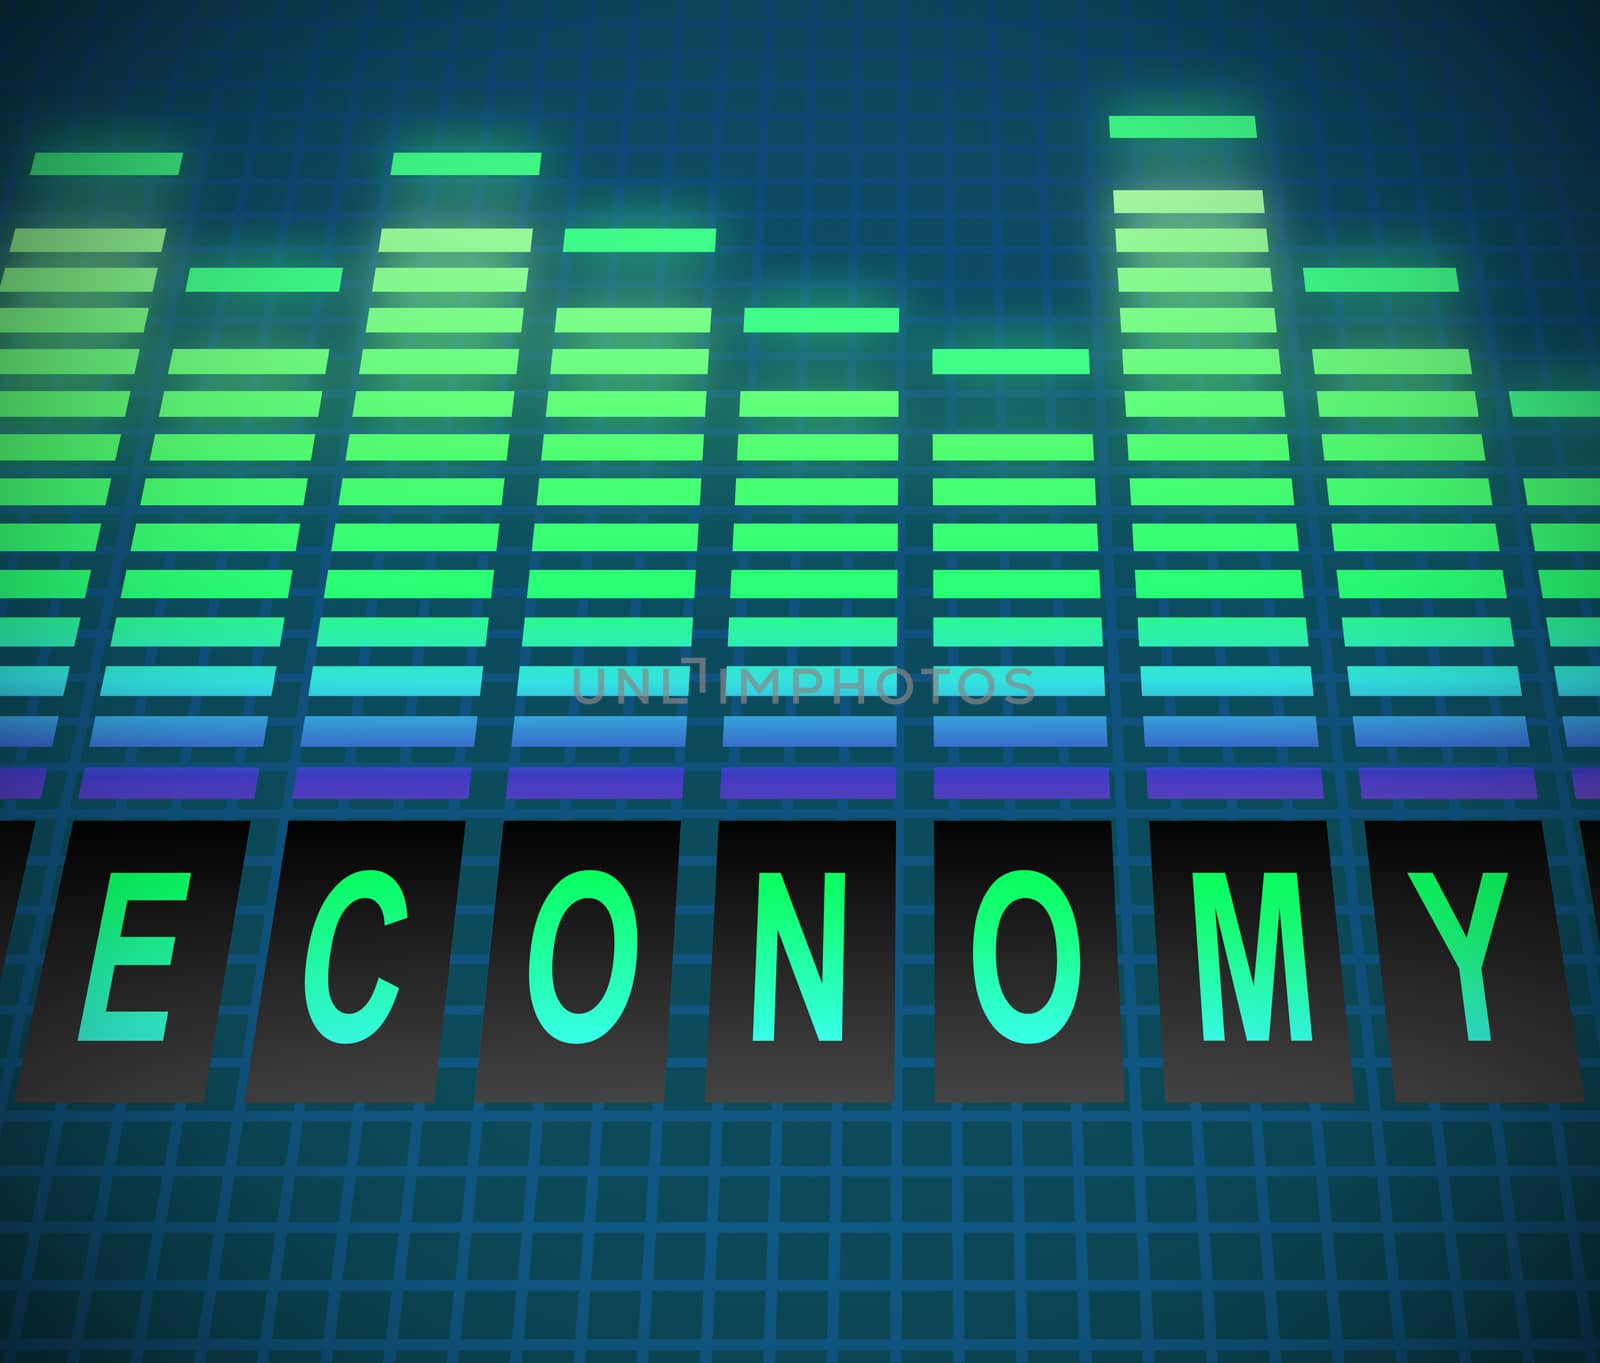 Illustration depicting graphic equalizer levels with an economy concept.